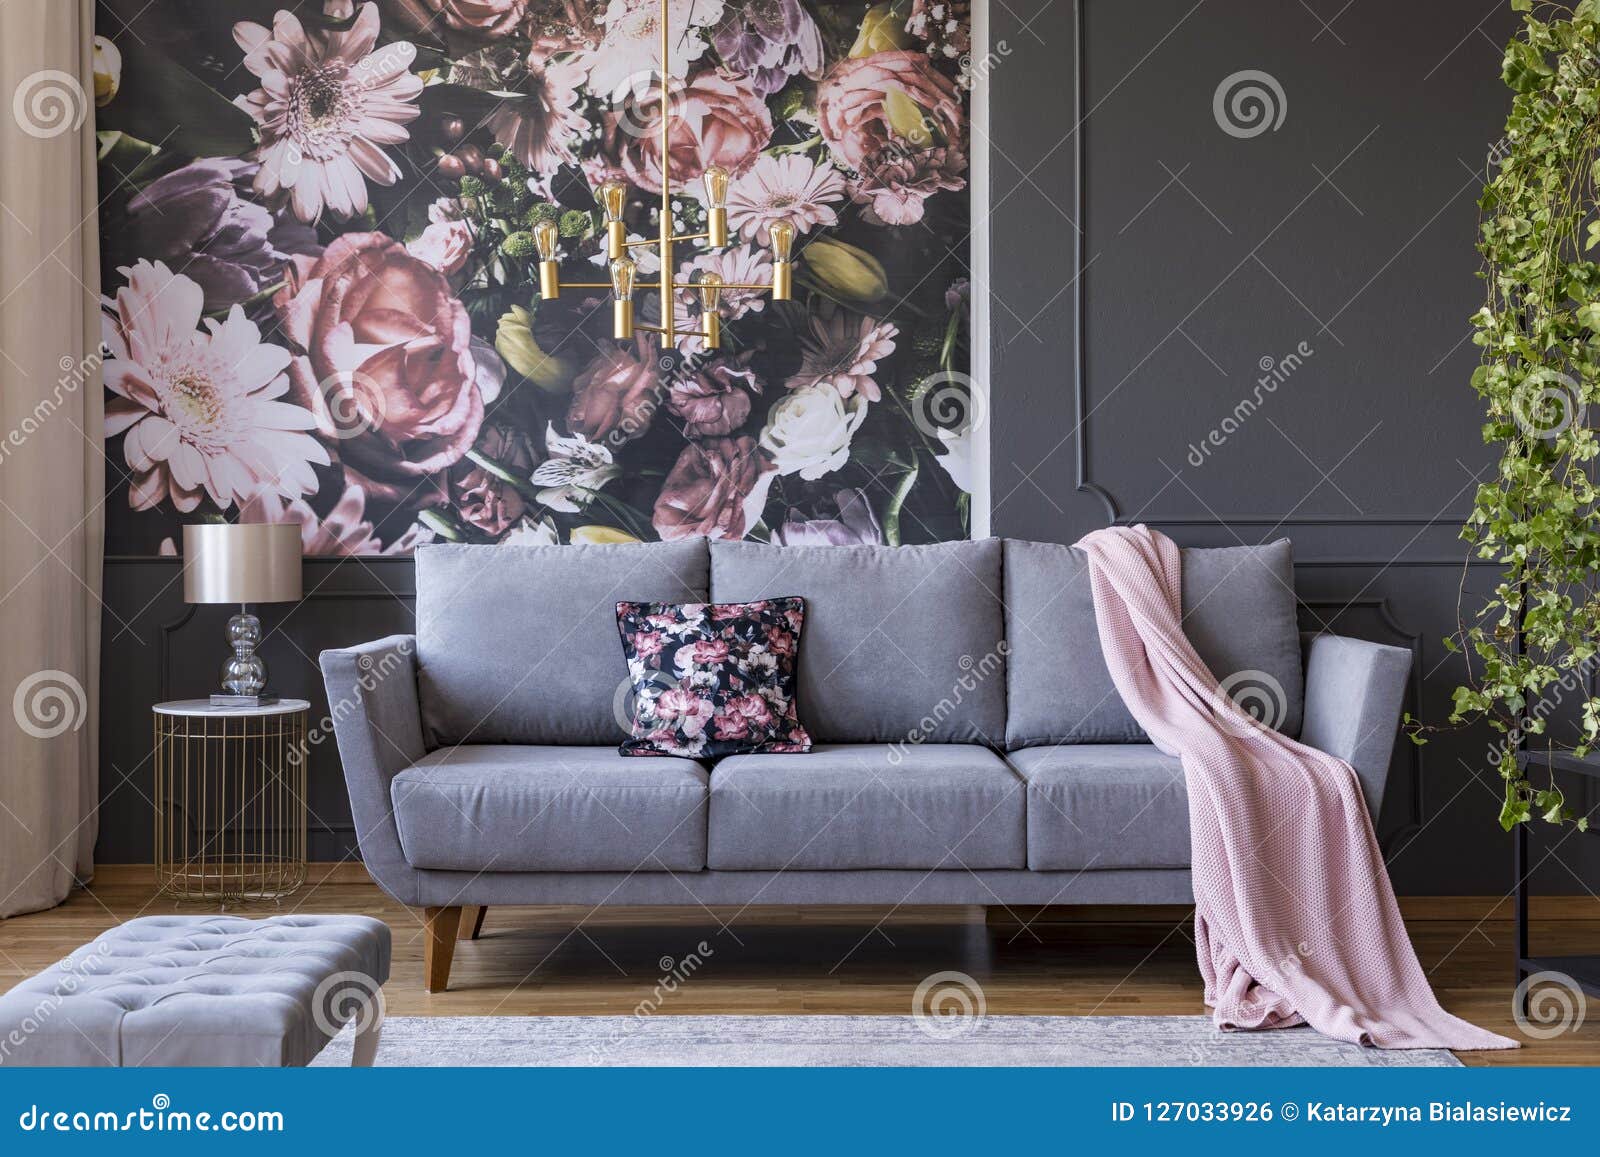 Real Photo Of A Living Room Interior With A Sofa Pillow 